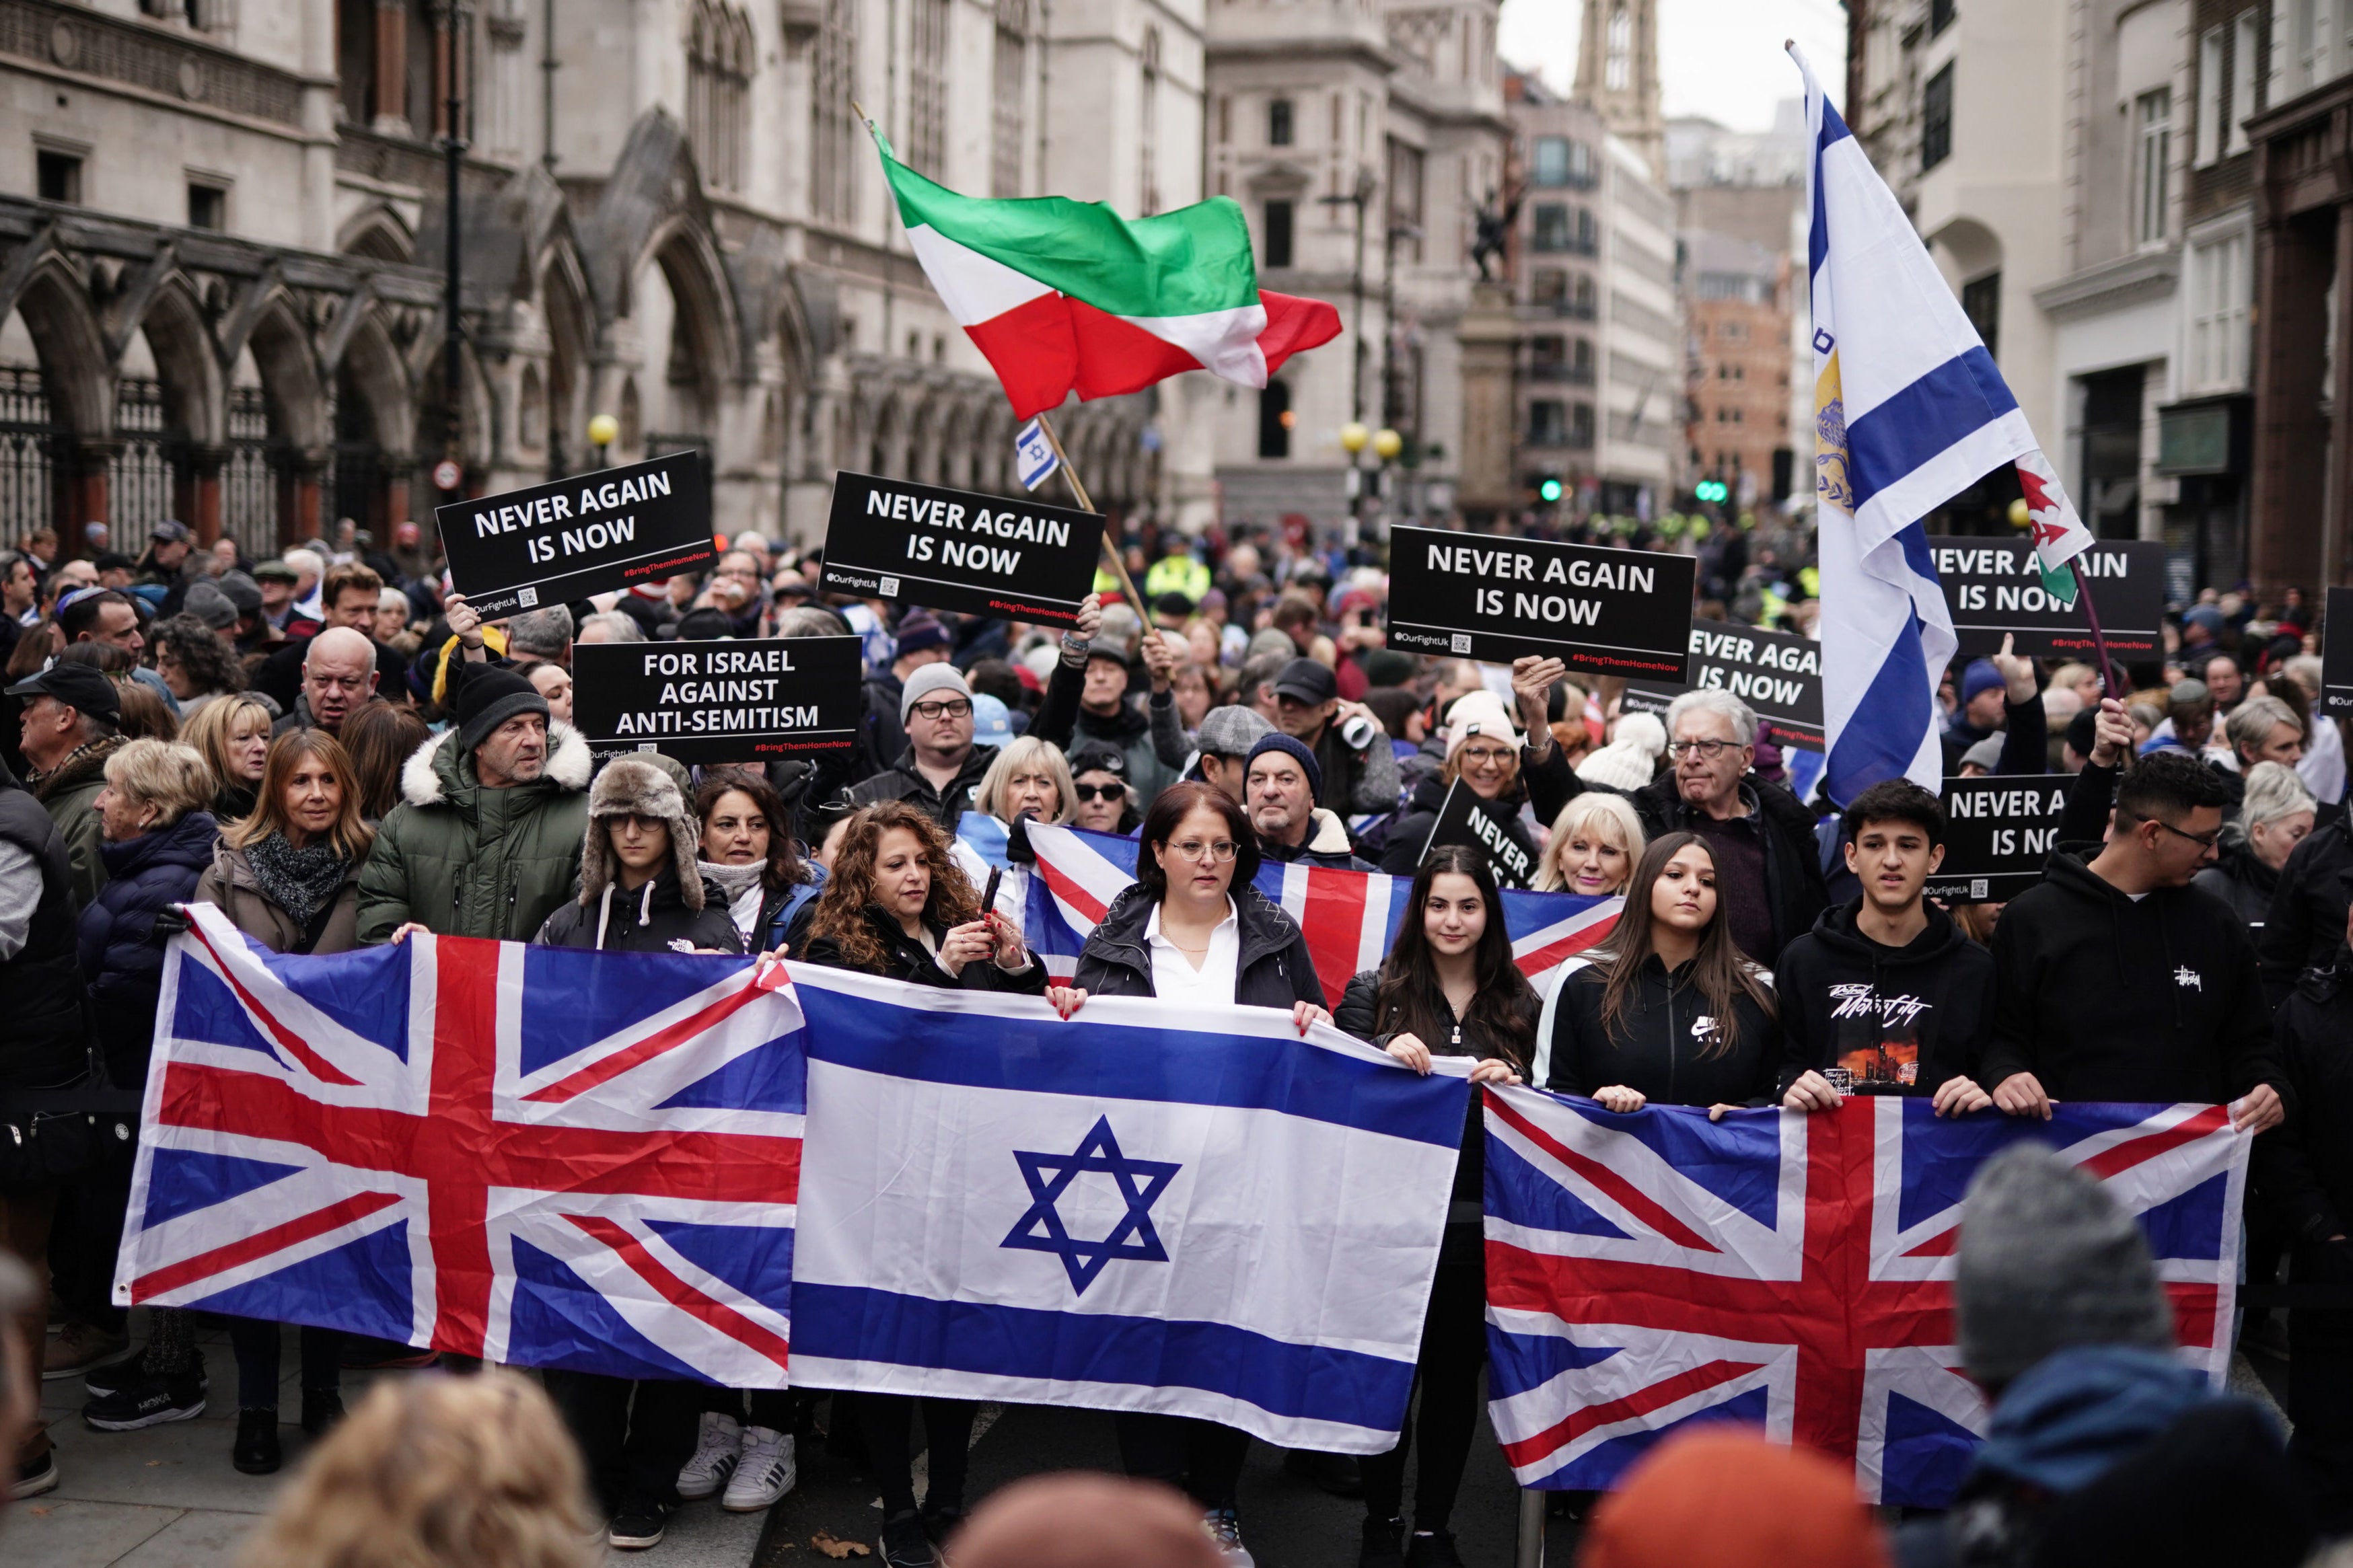 Police have expressed concern about rising incidents of antisemitism and Islamophobia